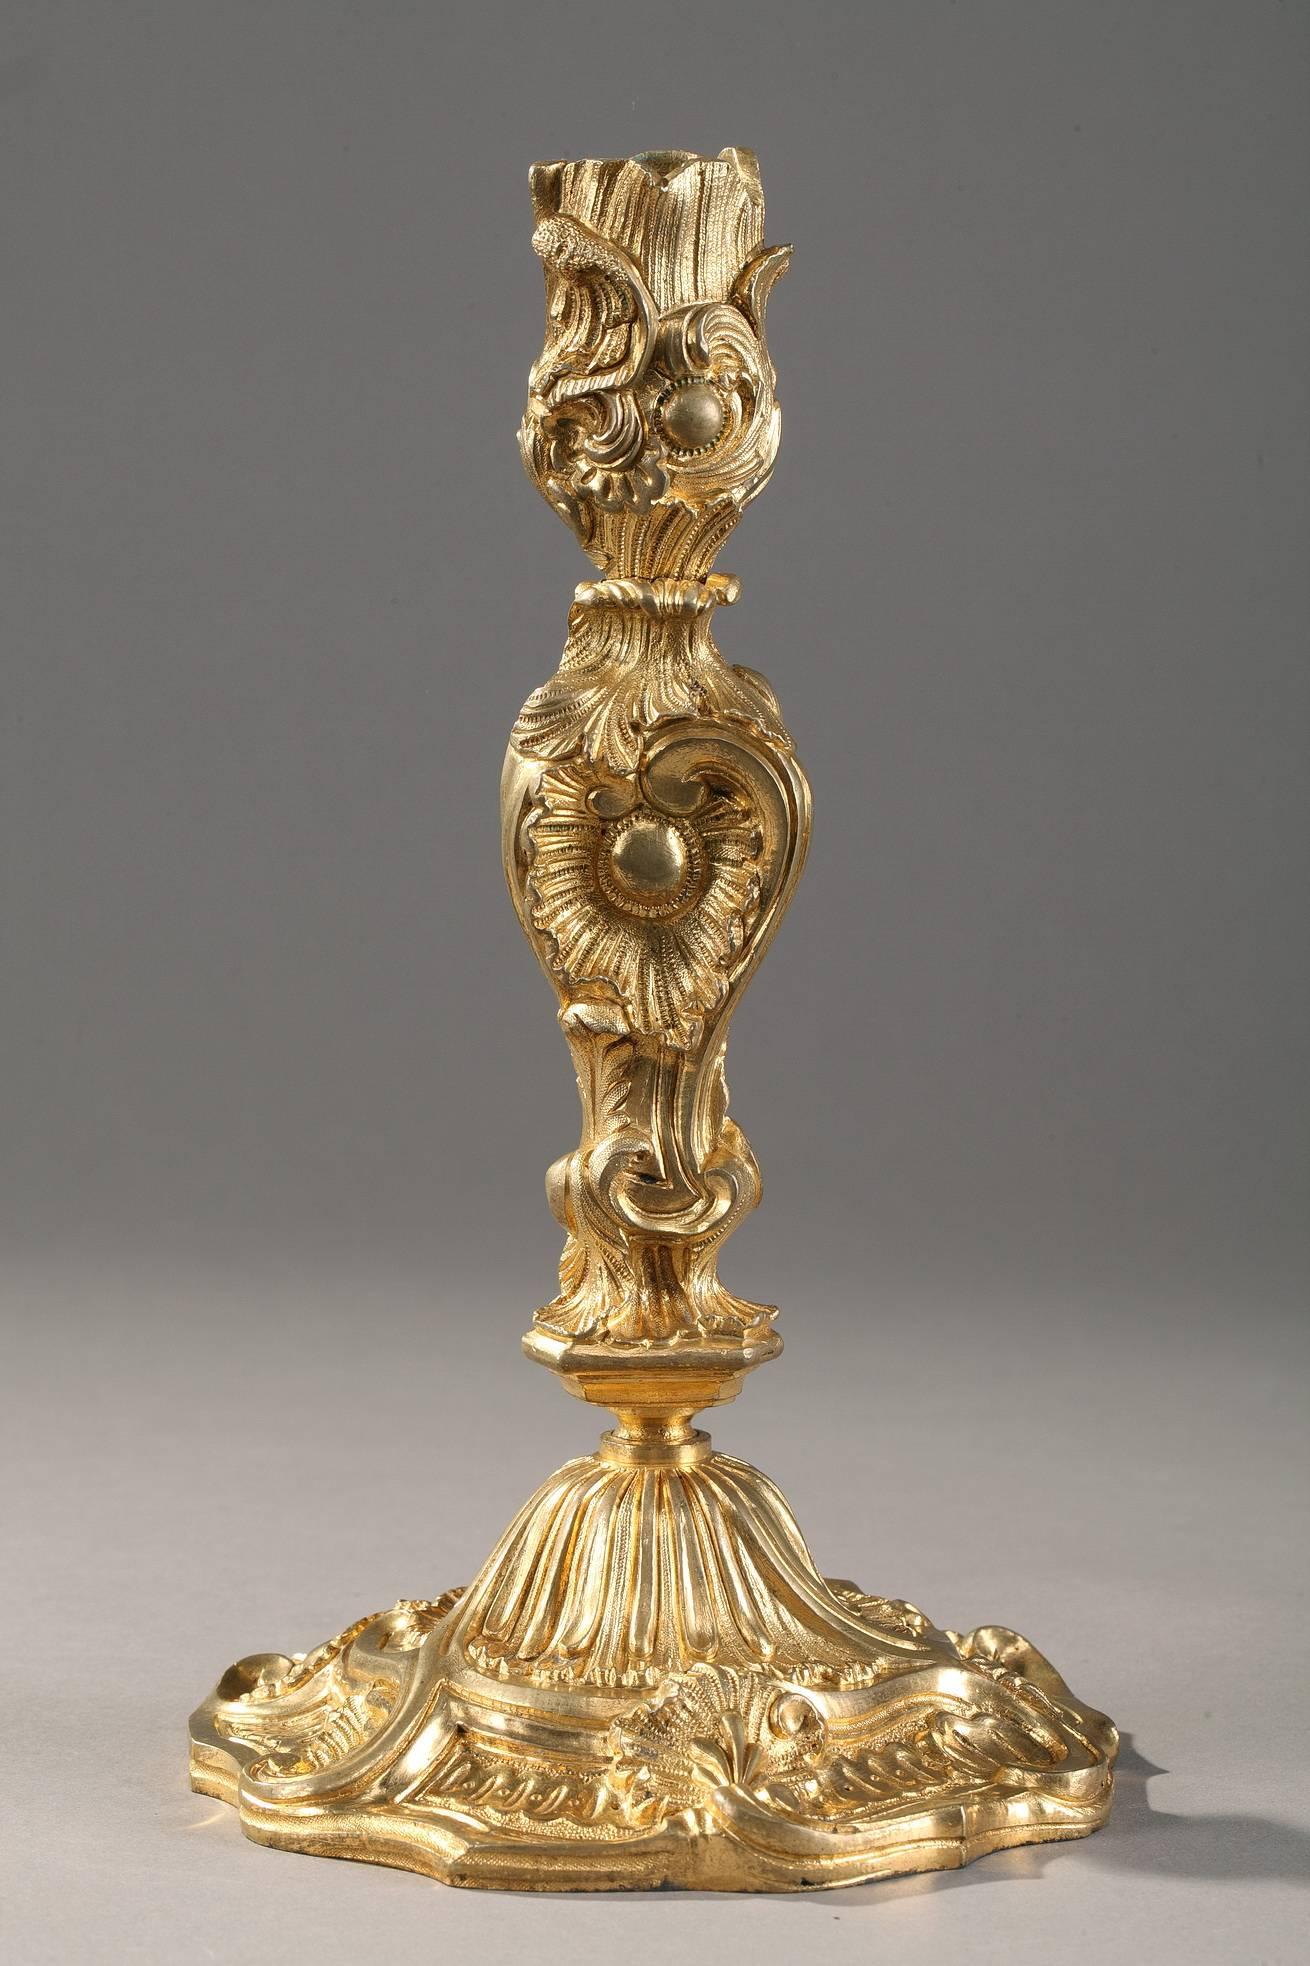 Pair of gilt and chiseled bronze candlesticks. The stem of each candlestick is sculpted with abundant foliage and intricate ribbing, spiraling upward to support the nozzle which is also embellished with lively foliage. Each candlestick is set on a